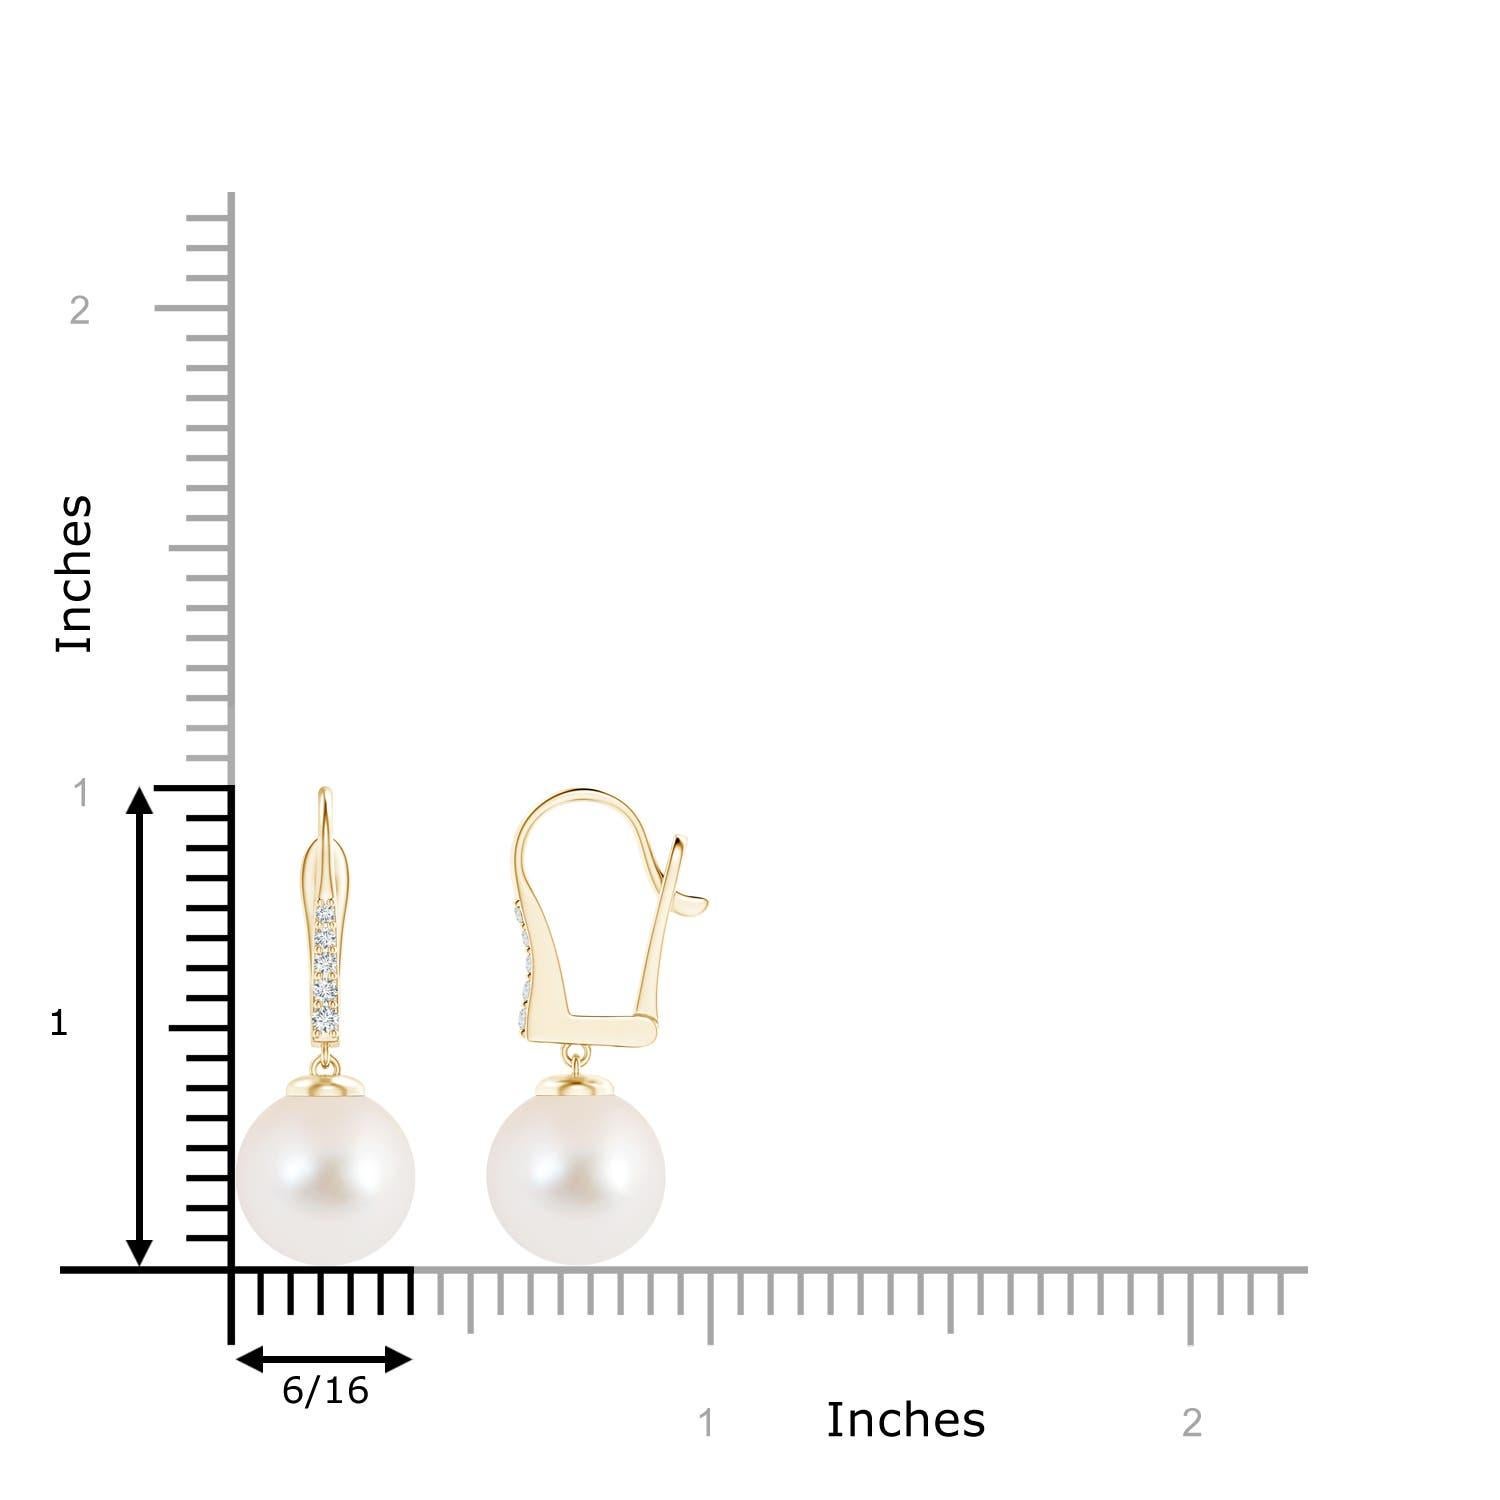 These lever back drop earrings are adorned with Freshwater cultured pearls that glisten magnificently. The pearls are secured to diamond-studded lever backs that add an extra dose of beauty to these solitaire pearl earrings. The glistening diamonds